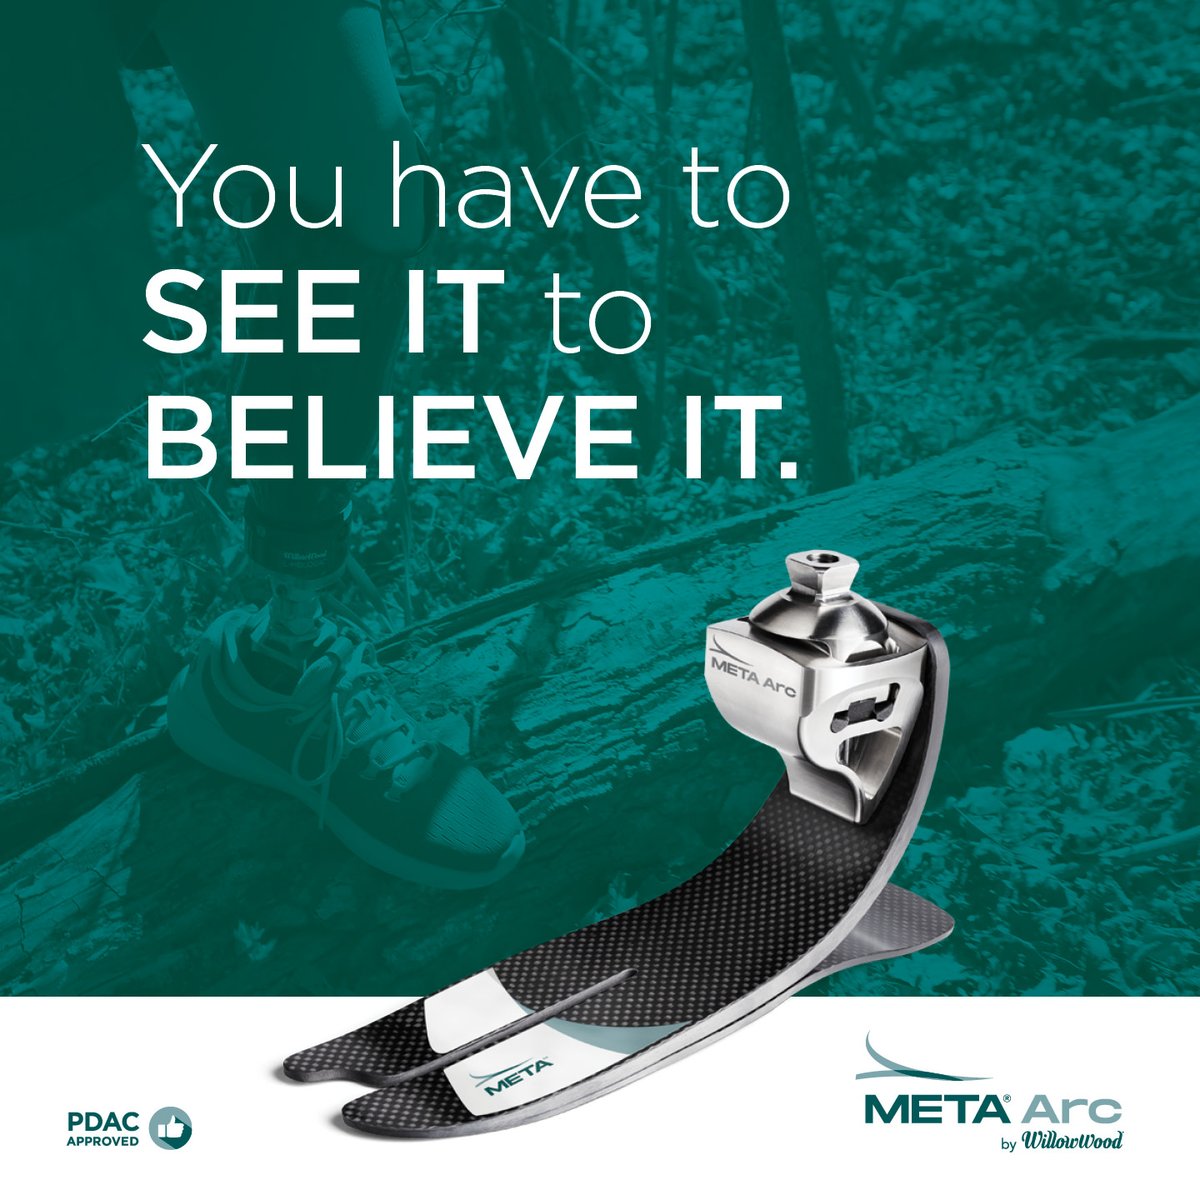 If you haven’t seen how META Arc works, what are you waiting for? META Arc is the first-ever polycentric ankle. It’s the closest thing to an anatomical ankle yet. See META Arc in action at rb.gy/9r8hef